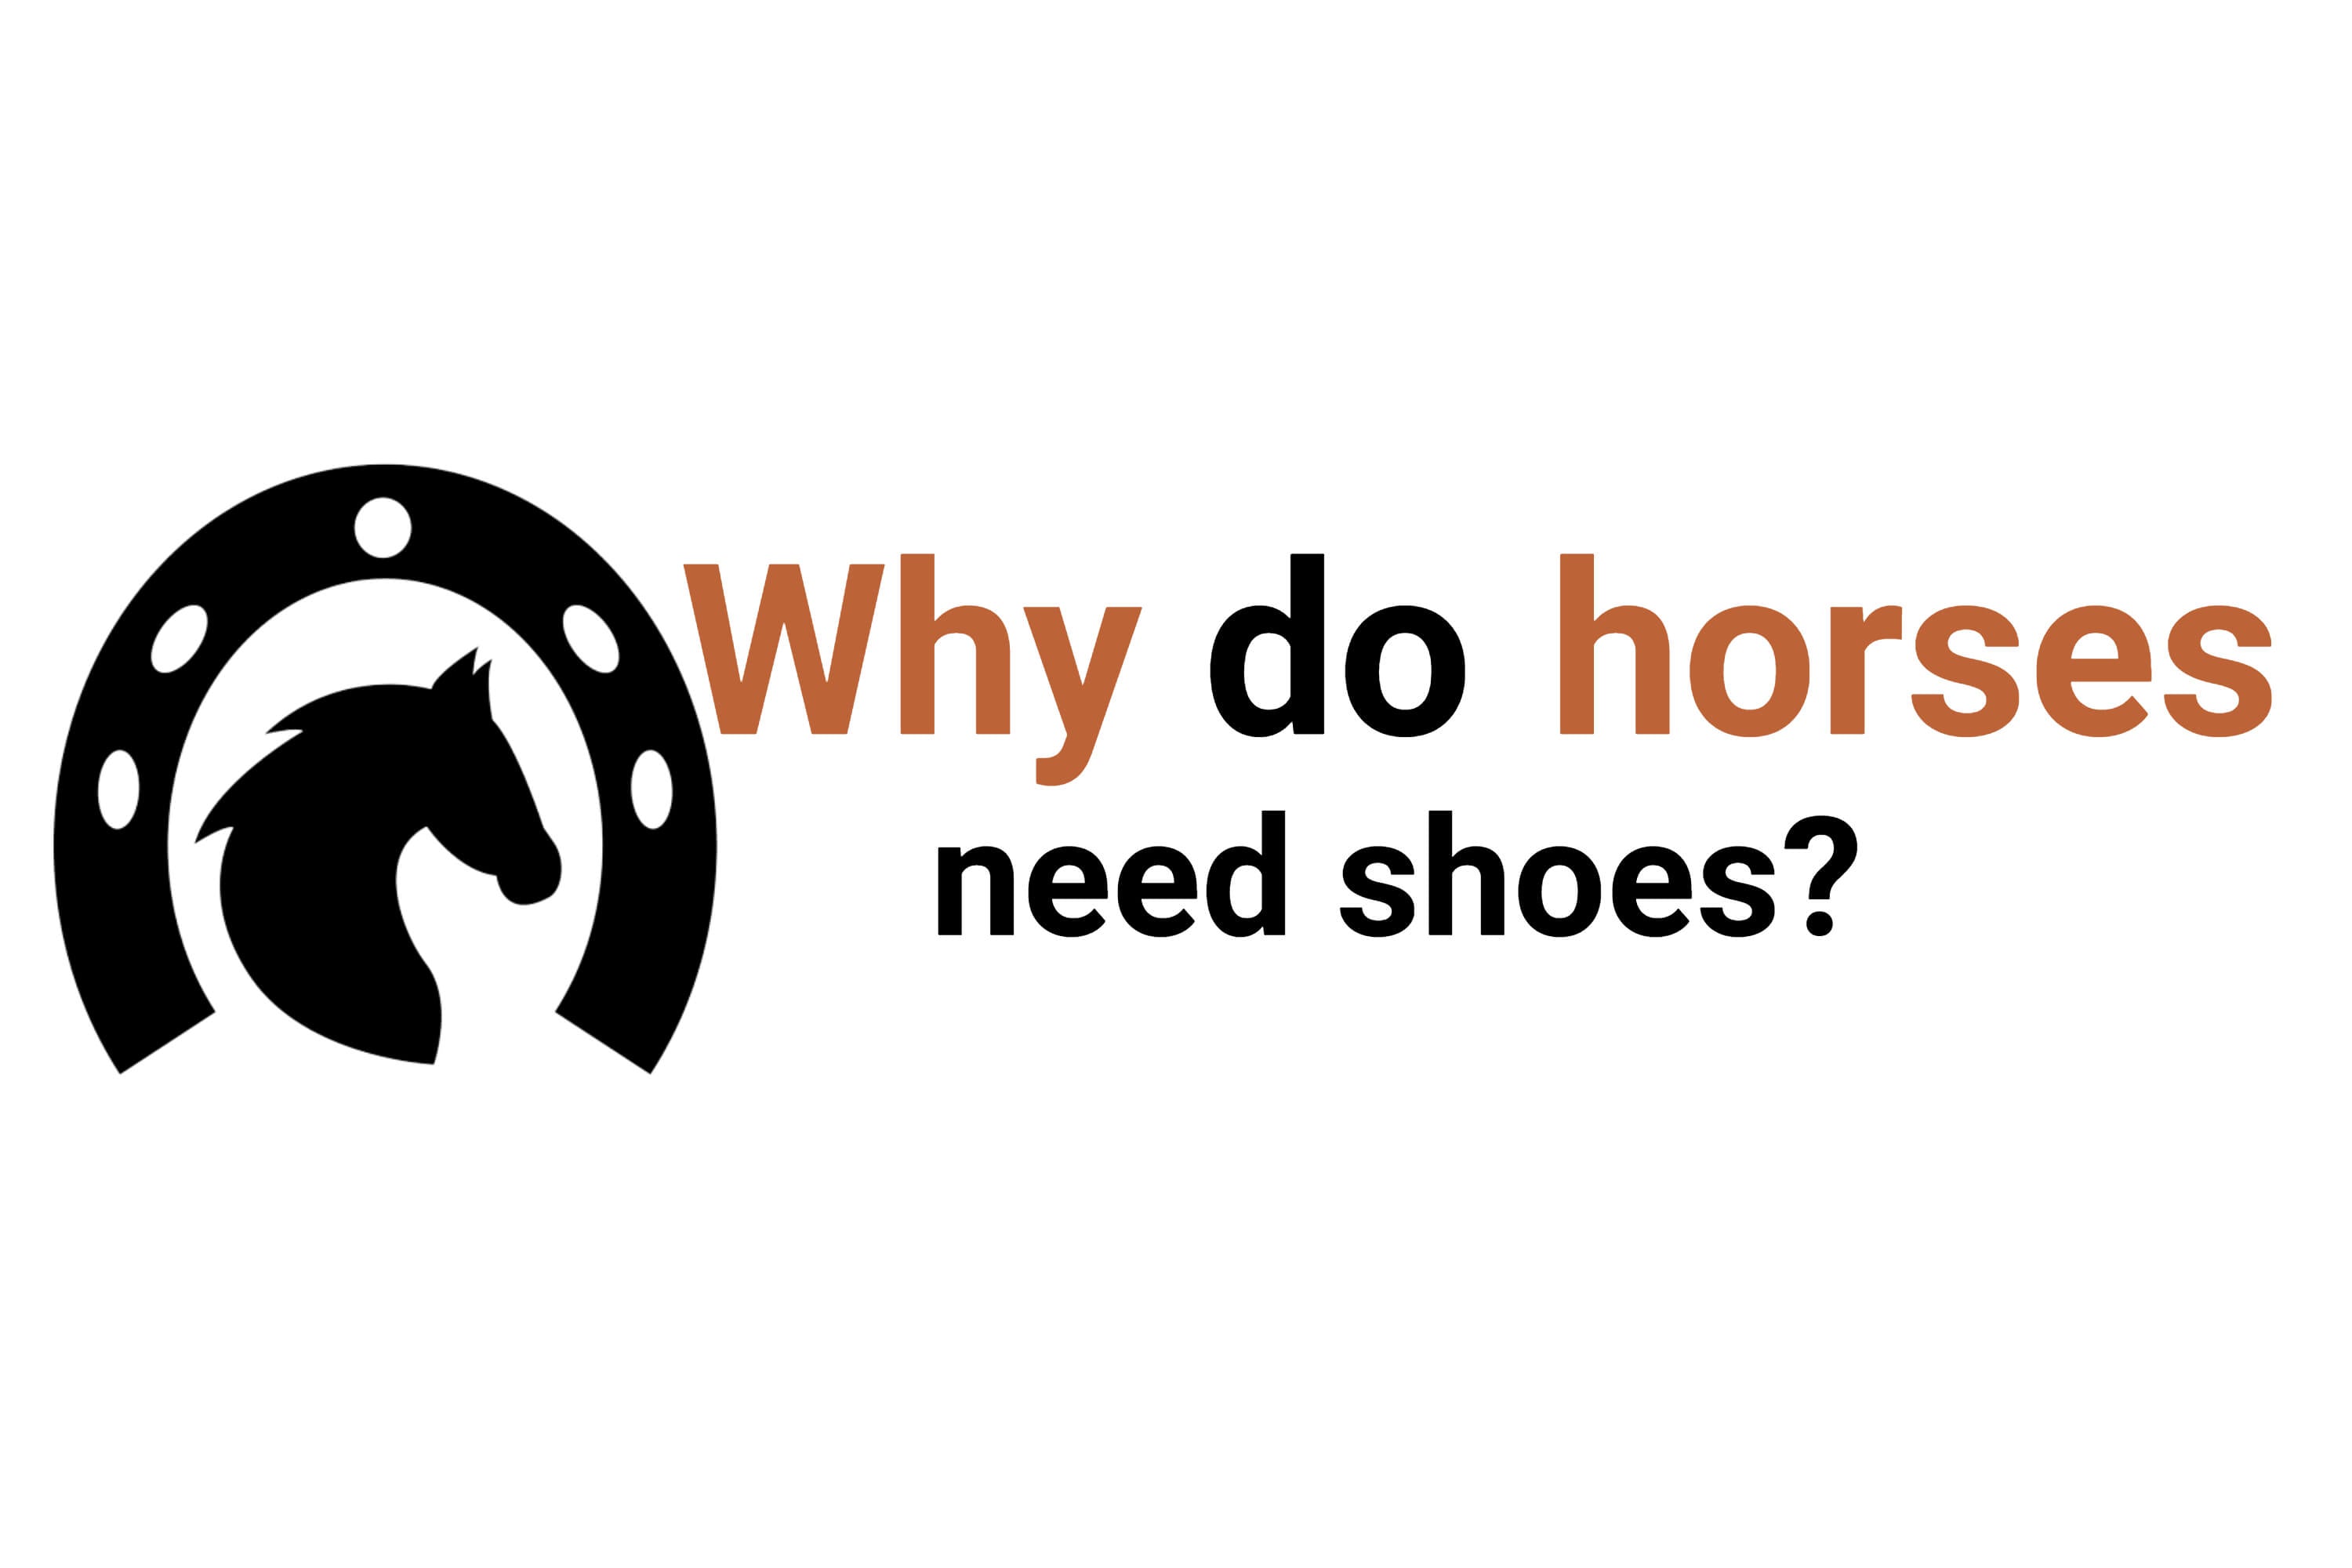 Why do horses need shoes?